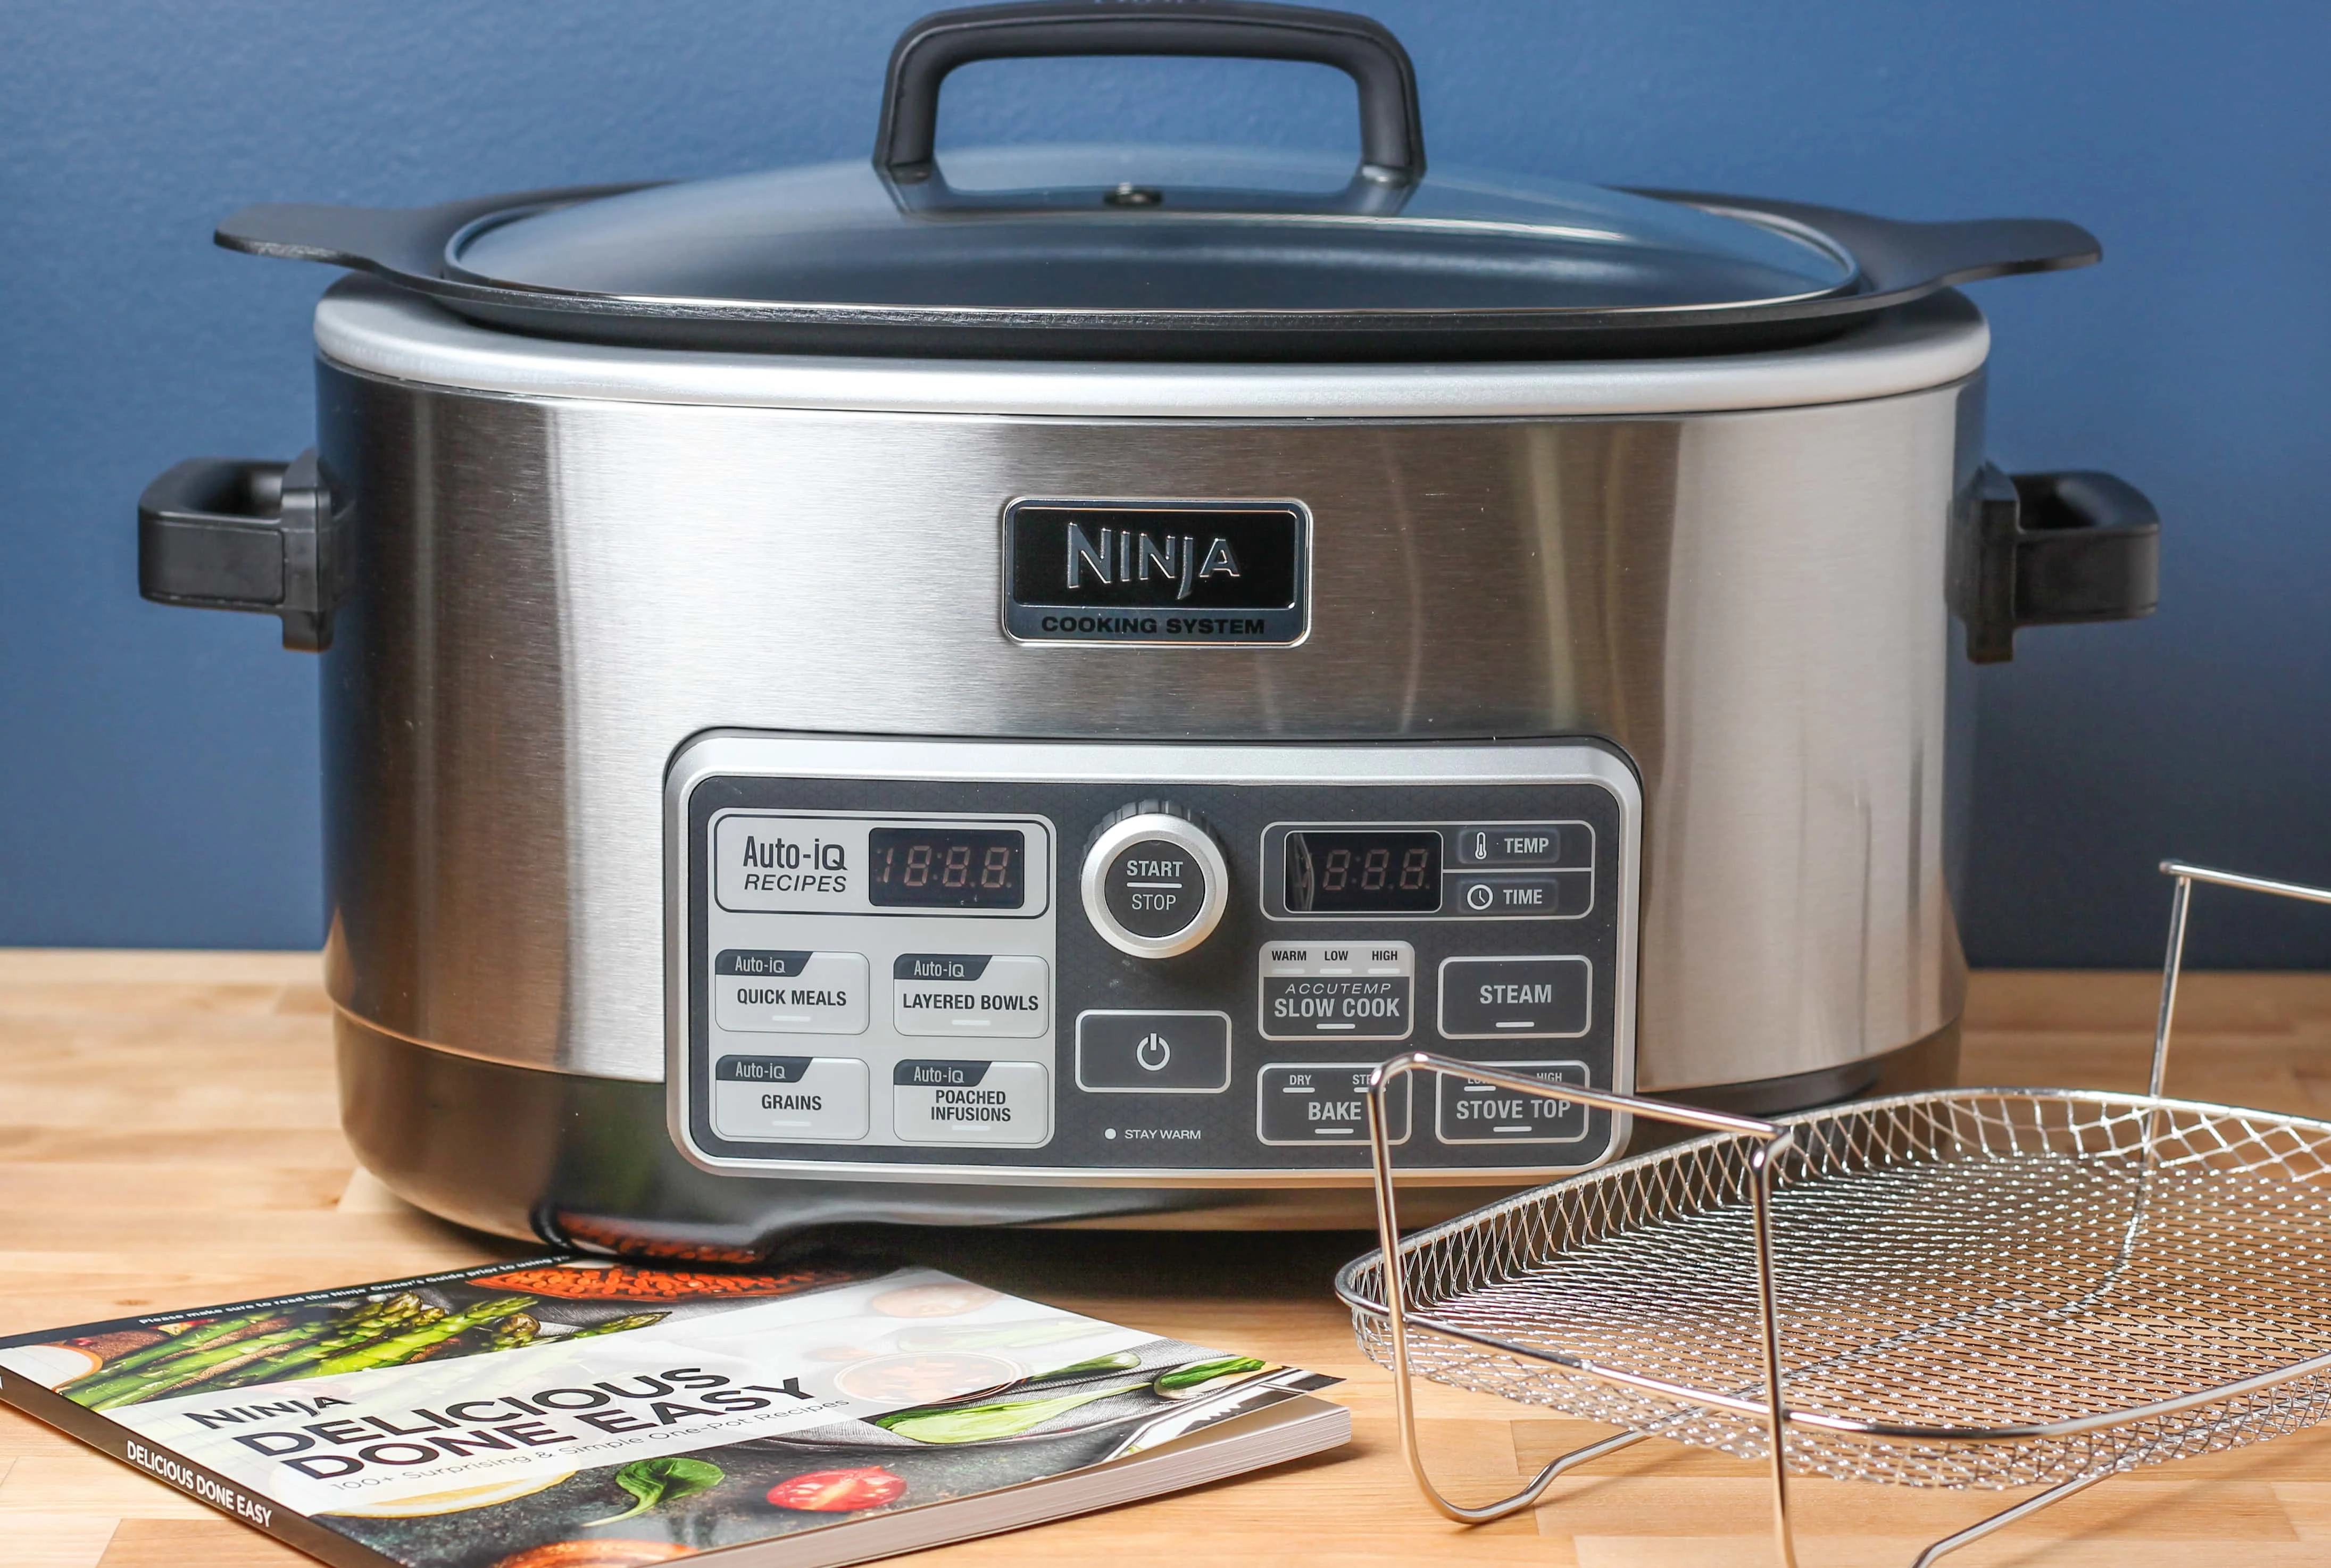 Ninja Cooking System with Auto iQ